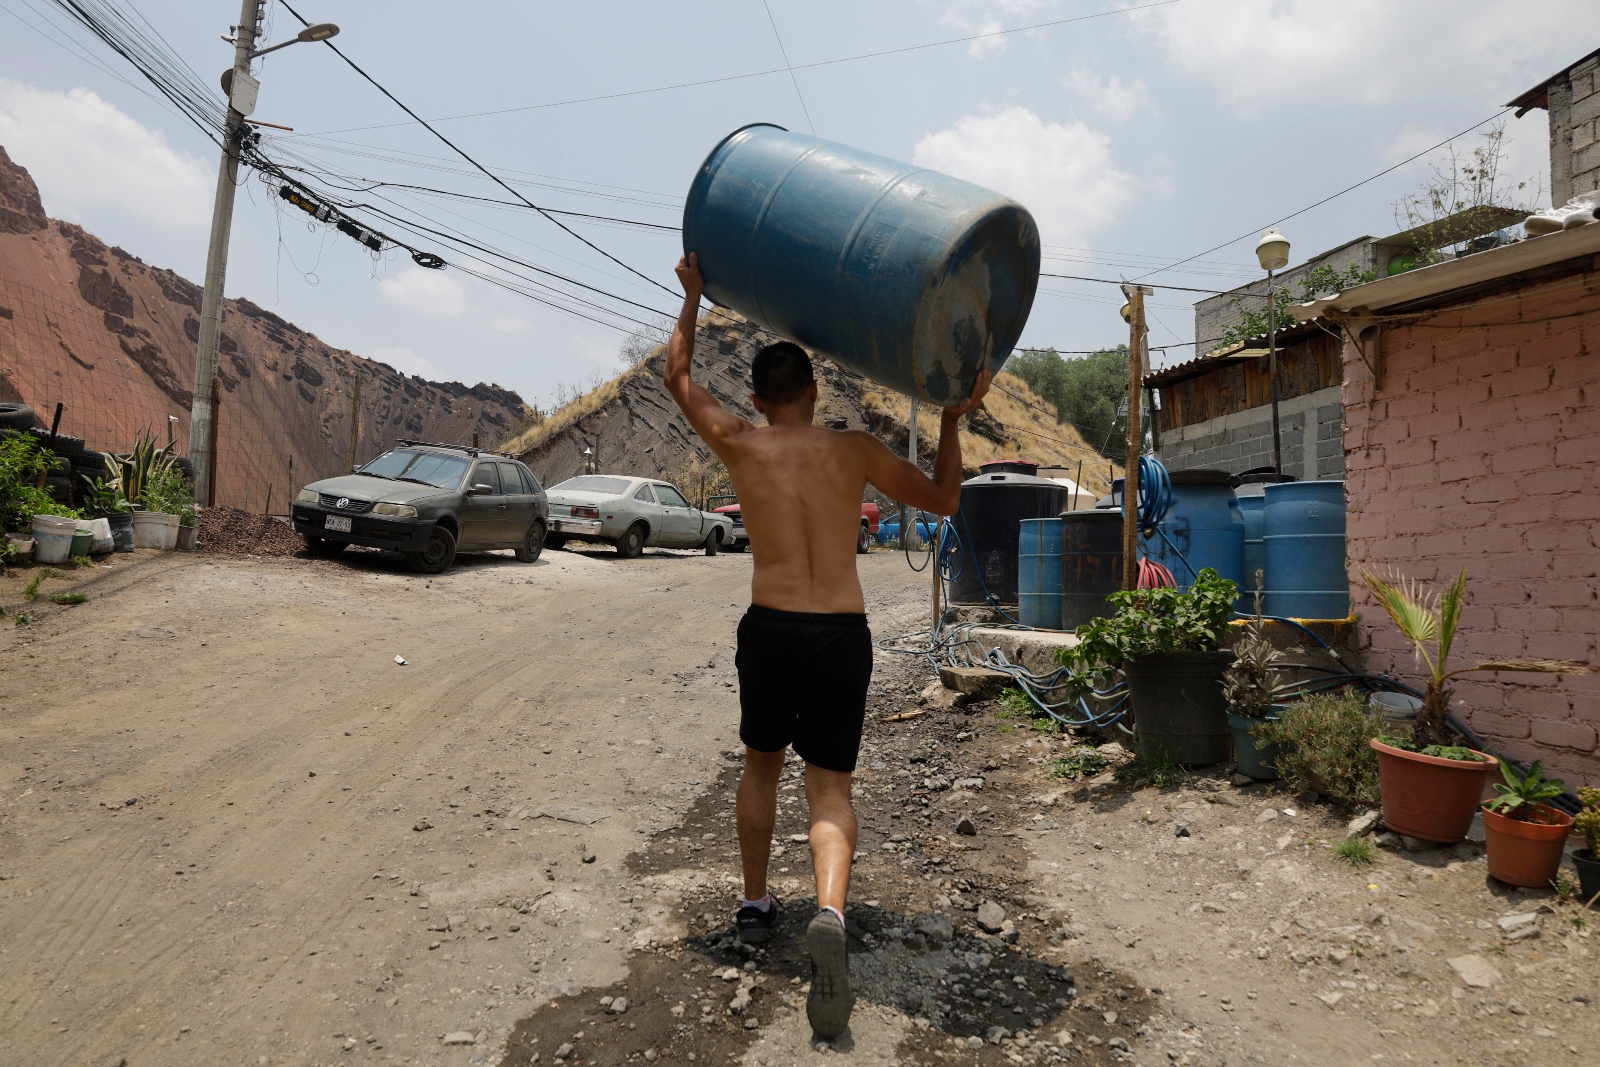 A man carries a barrel for water in the Iztapalapa borough of Mexico City. The city has experienced a worsening water crisis for decades as underground aquifers run dry.